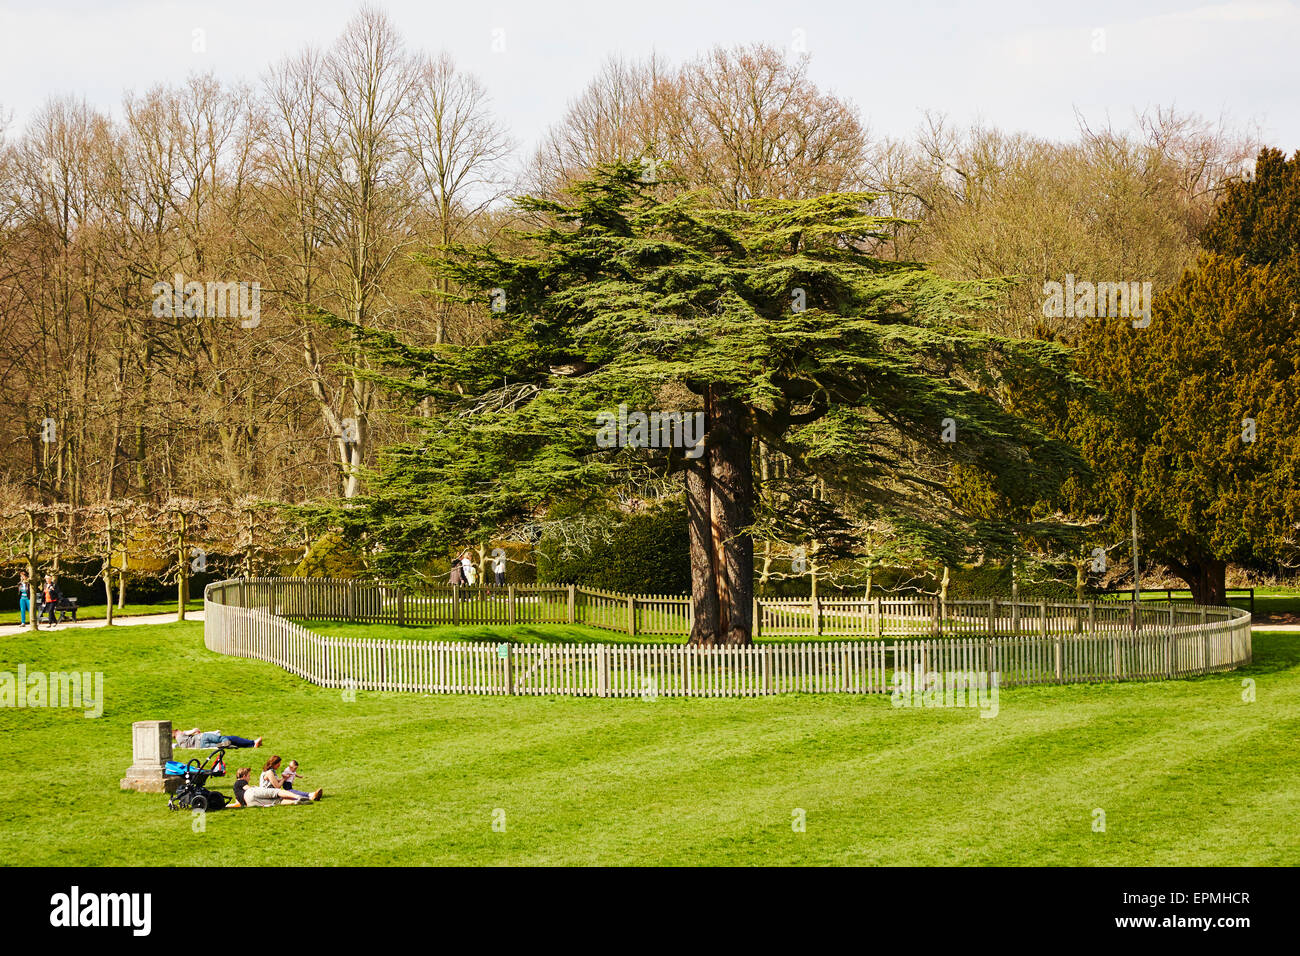 Old cedar tree at Rufford Abbey Country Park, Nottinghamshire, England, UK. Stock Photo